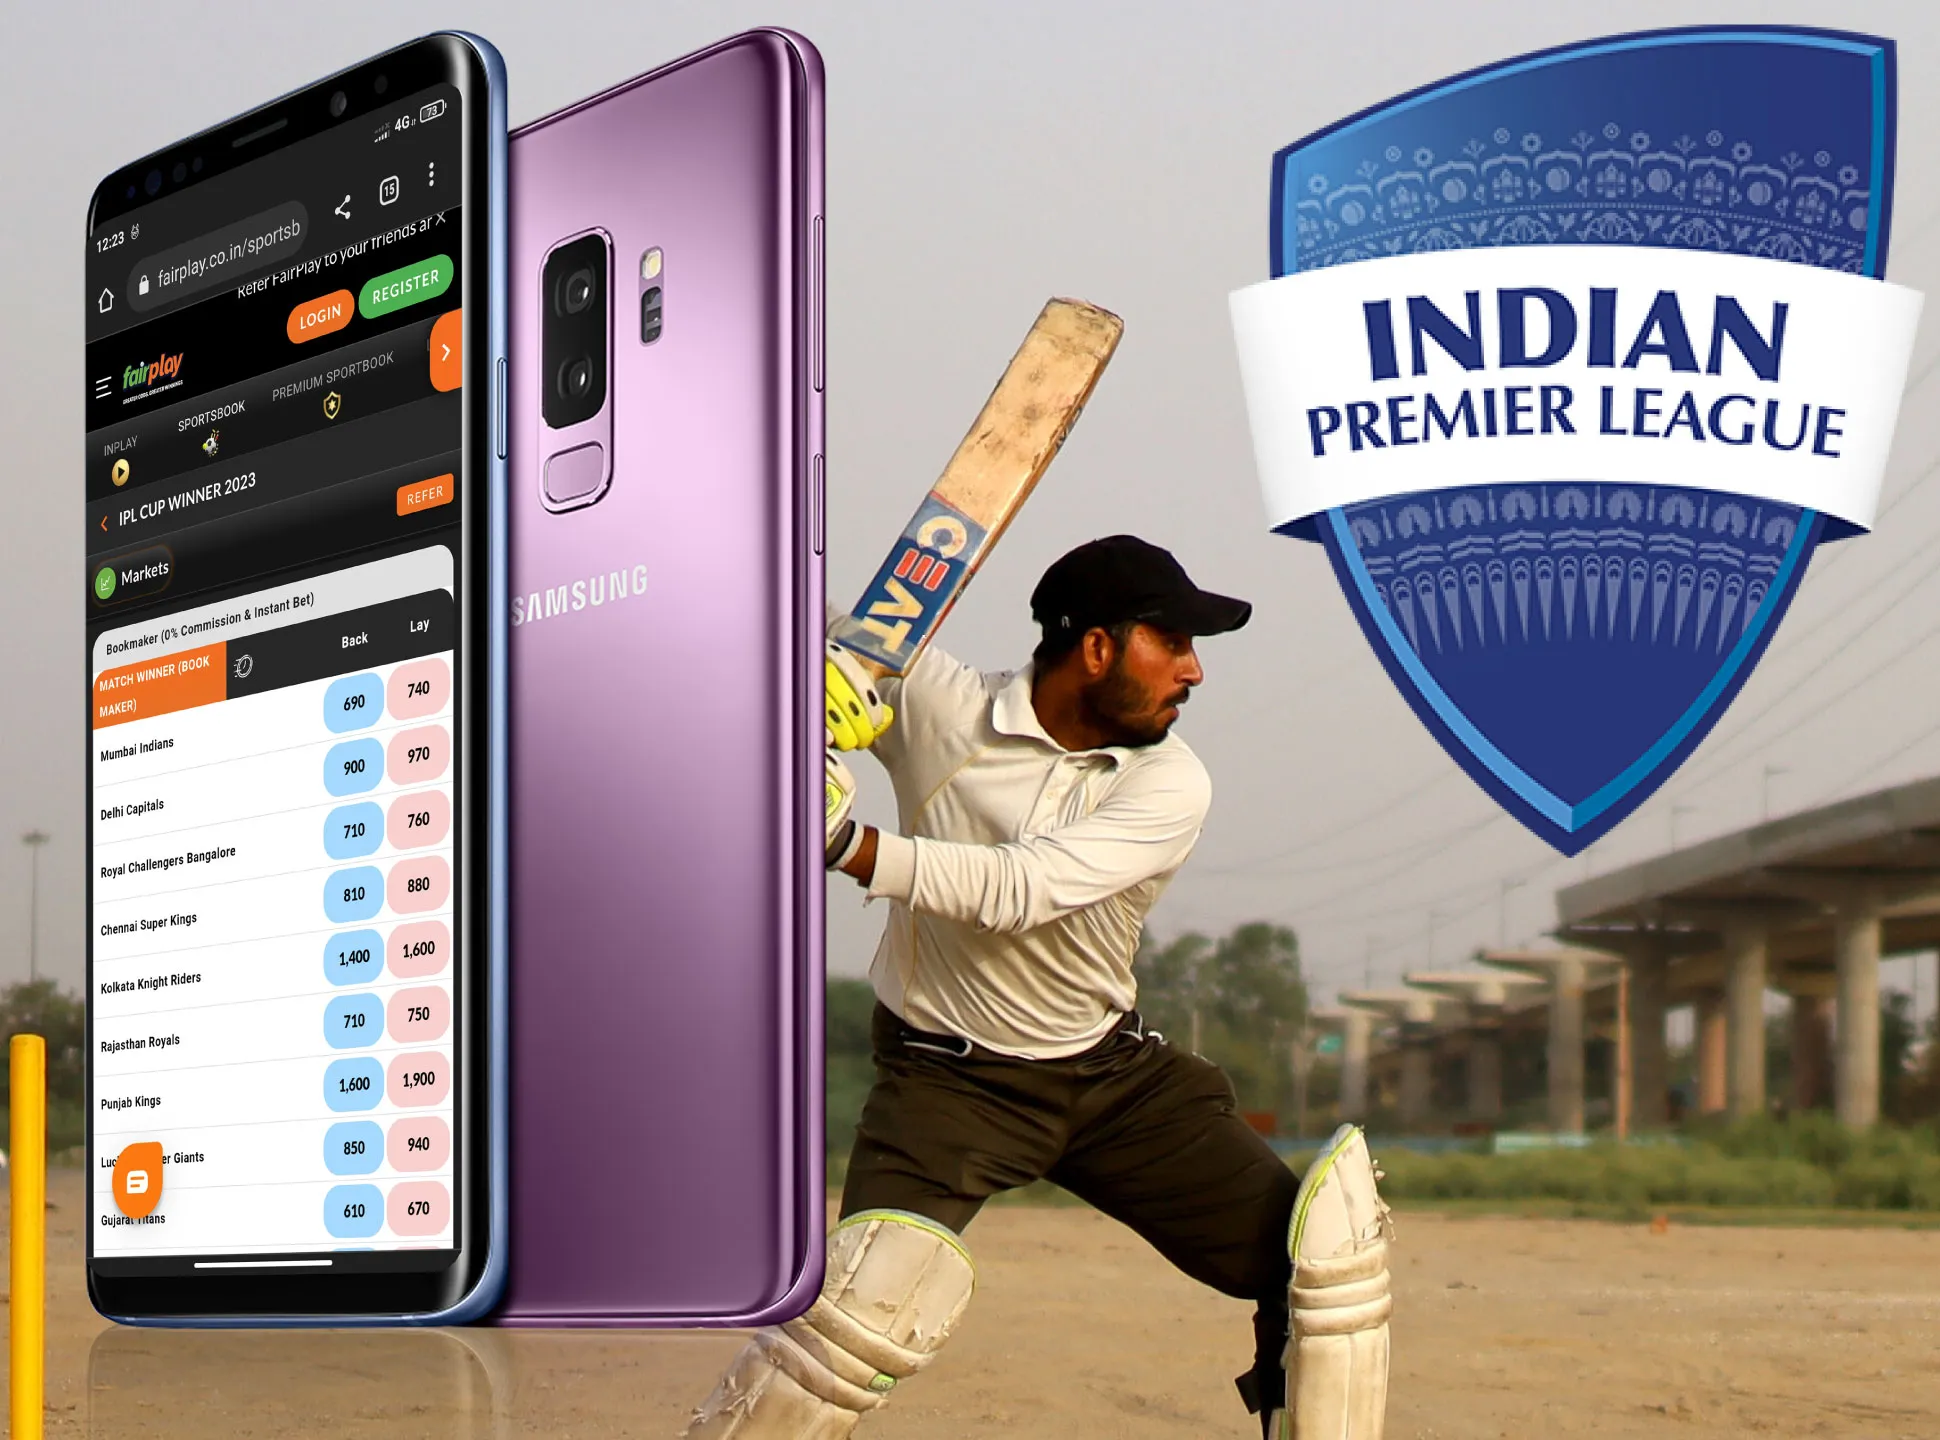 Fairplay provides betting on the IPL matches in its app.